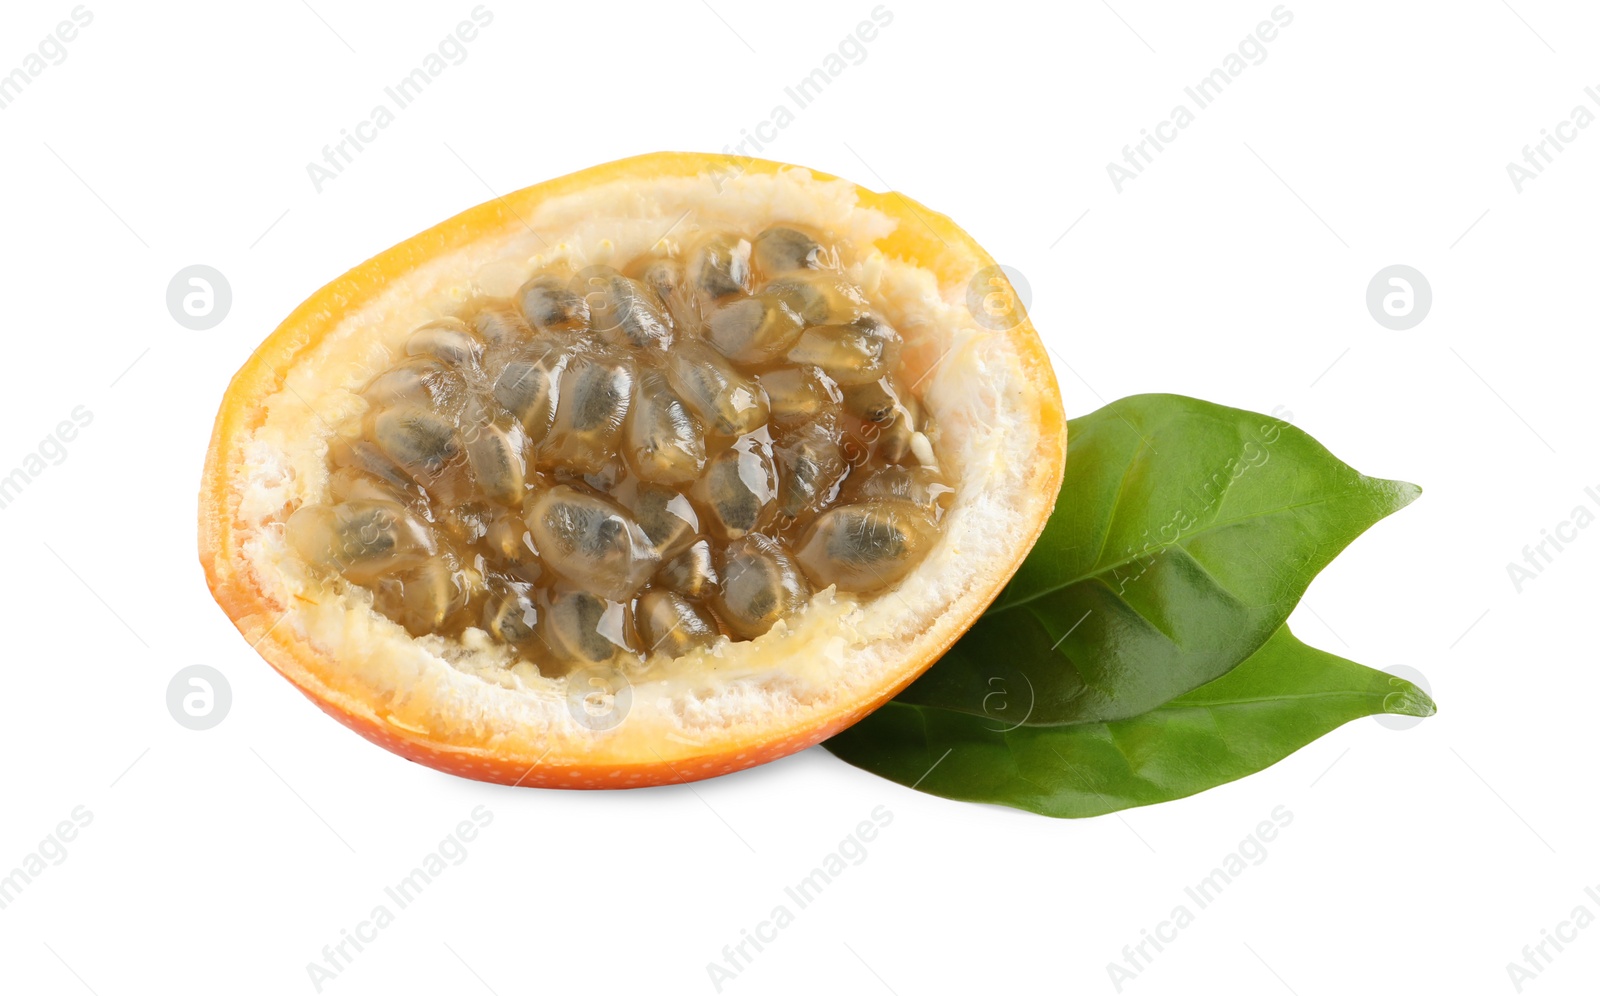 Photo of Half of delicious ripe granadilla with green leaves isolated on white